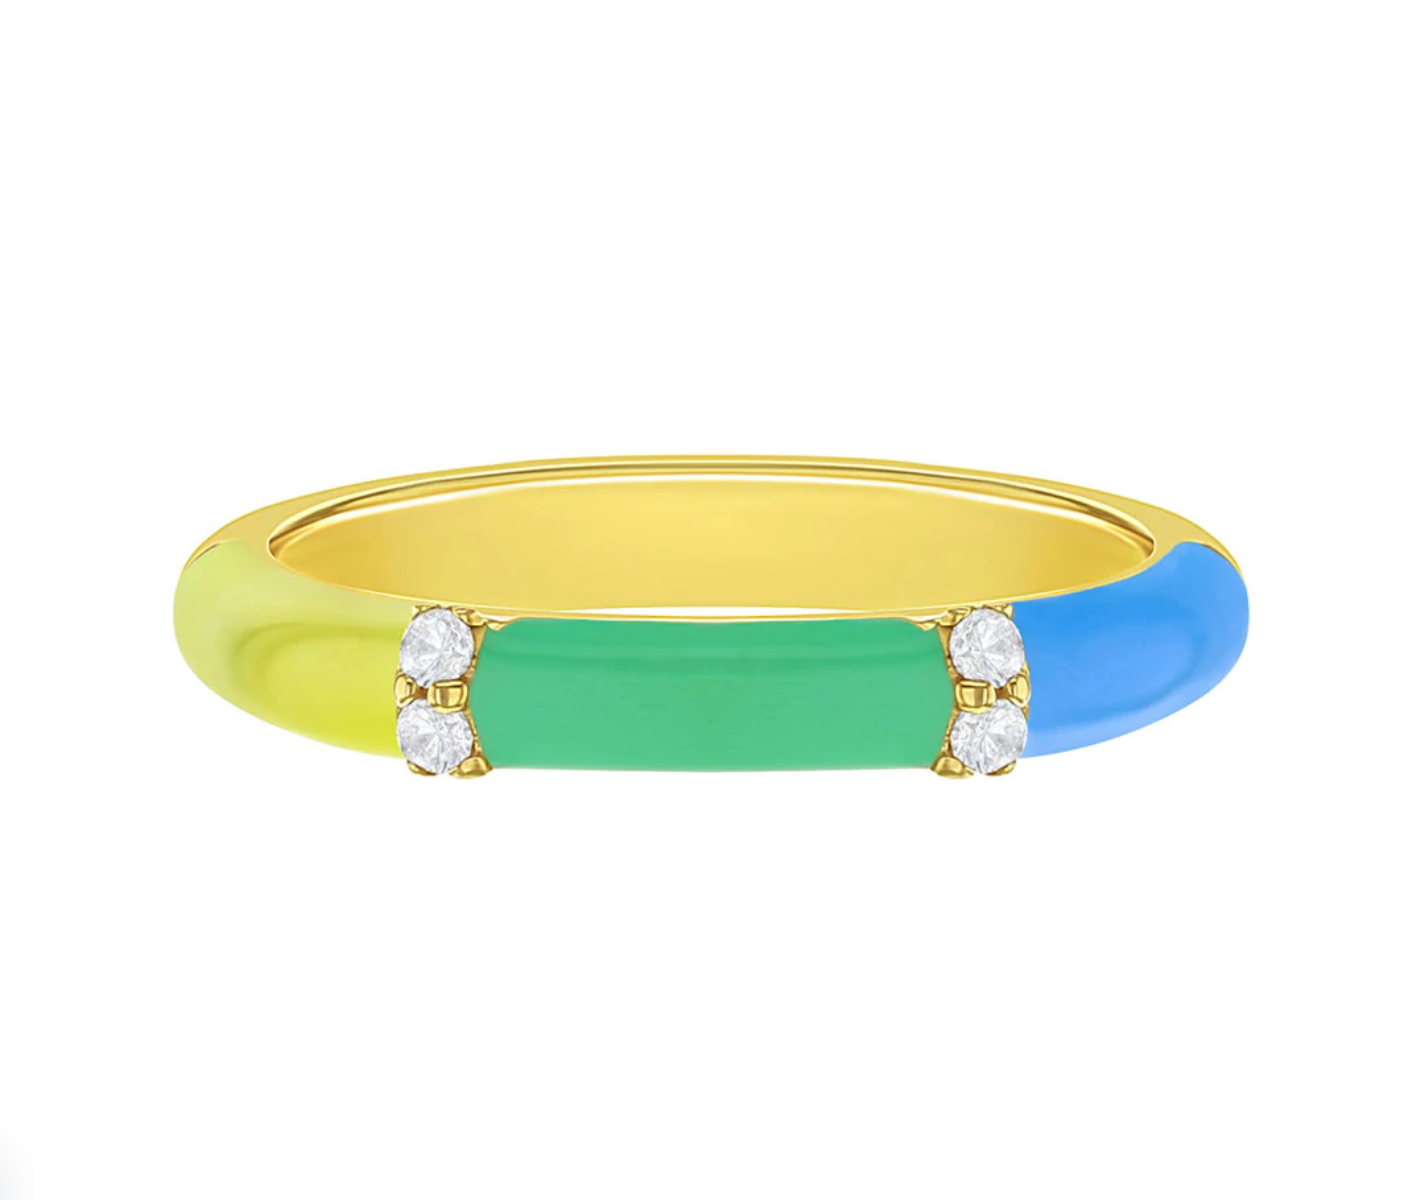 925 Sterling Silver Blue & Green Enamel Band Ring With Clear Cubic Zirconia Stones for Teenage Girls Size - 6